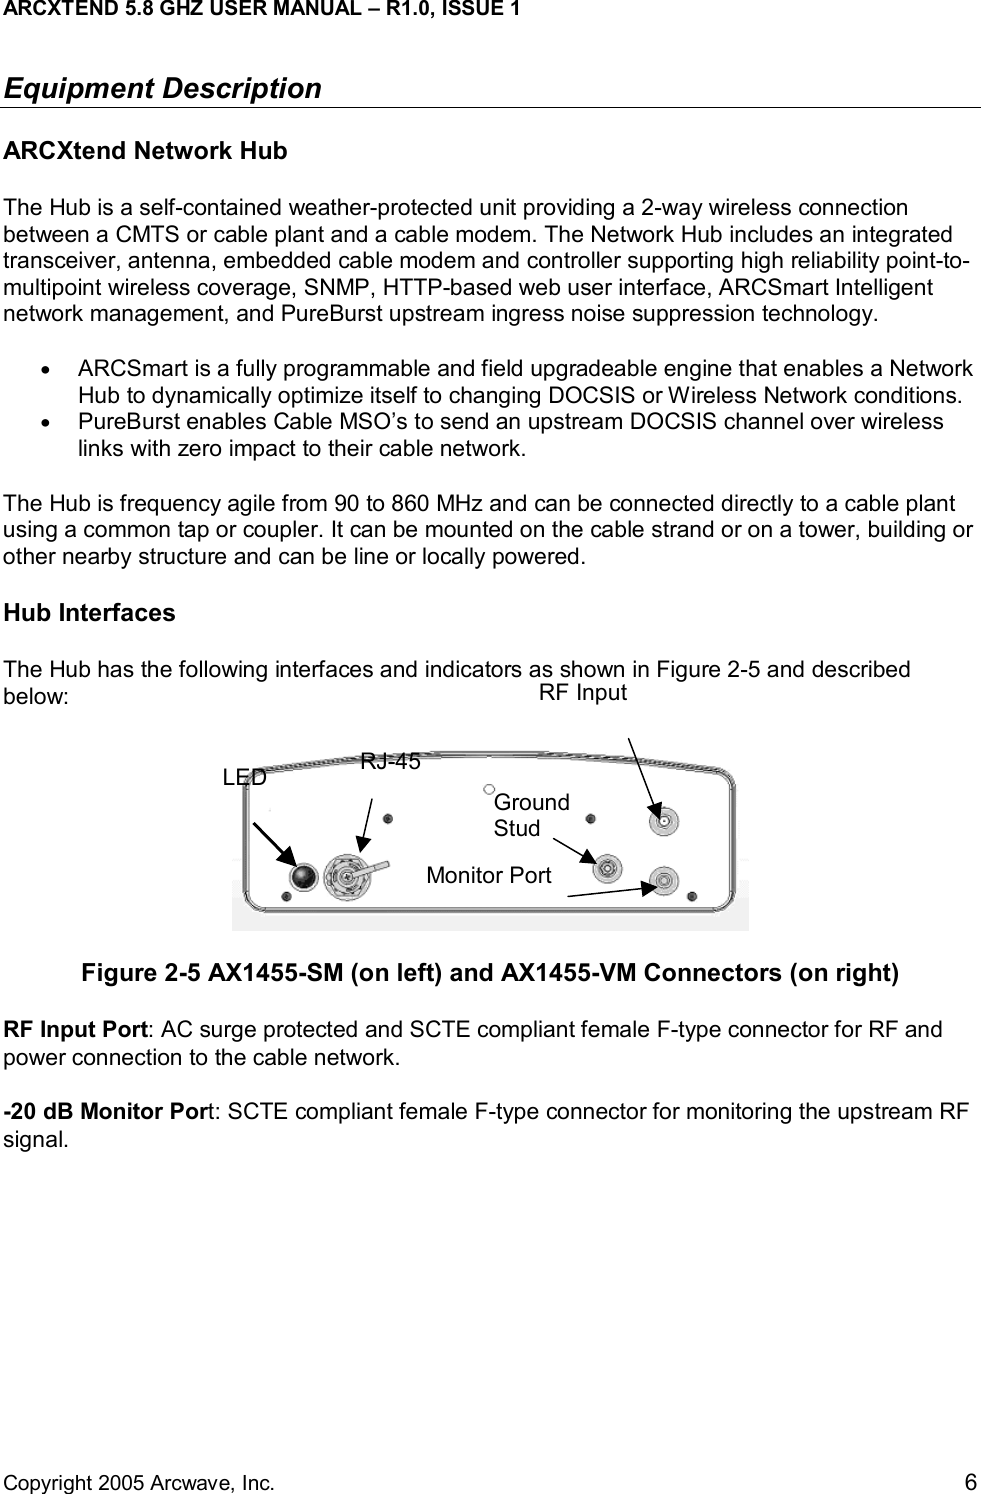 ARCXTEND 5.8 GHZ USER MANUAL – R1.0, ISSUE 1  Copyright 2005 Arcwave, Inc.    6 Equipment Description ARCXtend Network Hub The Hub is a self-contained weather-protected unit providing a 2-way wireless connection between a CMTS or cable plant and a cable modem. The Network Hub includes an integrated transceiver, antenna, embedded cable modem and controller supporting high reliability point-to-multipoint wireless coverage, SNMP, HTTP-based web user interface, ARCSmart Intelligent network management, and PureBurst upstream ingress noise suppression technology.  •  ARCSmart is a fully programmable and field upgradeable engine that enables a Network Hub to dynamically optimize itself to changing DOCSIS or Wireless Network conditions.  •  PureBurst enables Cable MSO’s to send an upstream DOCSIS channel over wireless links with zero impact to their cable network. The Hub is frequency agile from 90 to 860 MHz and can be connected directly to a cable plant using a common tap or coupler. It can be mounted on the cable strand or on a tower, building or other nearby structure and can be line or locally powered.  Hub Interfaces The Hub has the following interfaces and indicators as shown in Figure 2-5 and described below:  Figure 2-5 AX1455-SM (on left) and AX1455-VM Connectors (on right) RF Input Port: AC surge protected and SCTE compliant female F-type connector for RF and power connection to the cable network.  -20 dB Monitor Port: SCTE compliant female F-type connector for monitoring the upstream RF signal.  LED  RJ-45 RF Input Monitor Port Ground Stud  